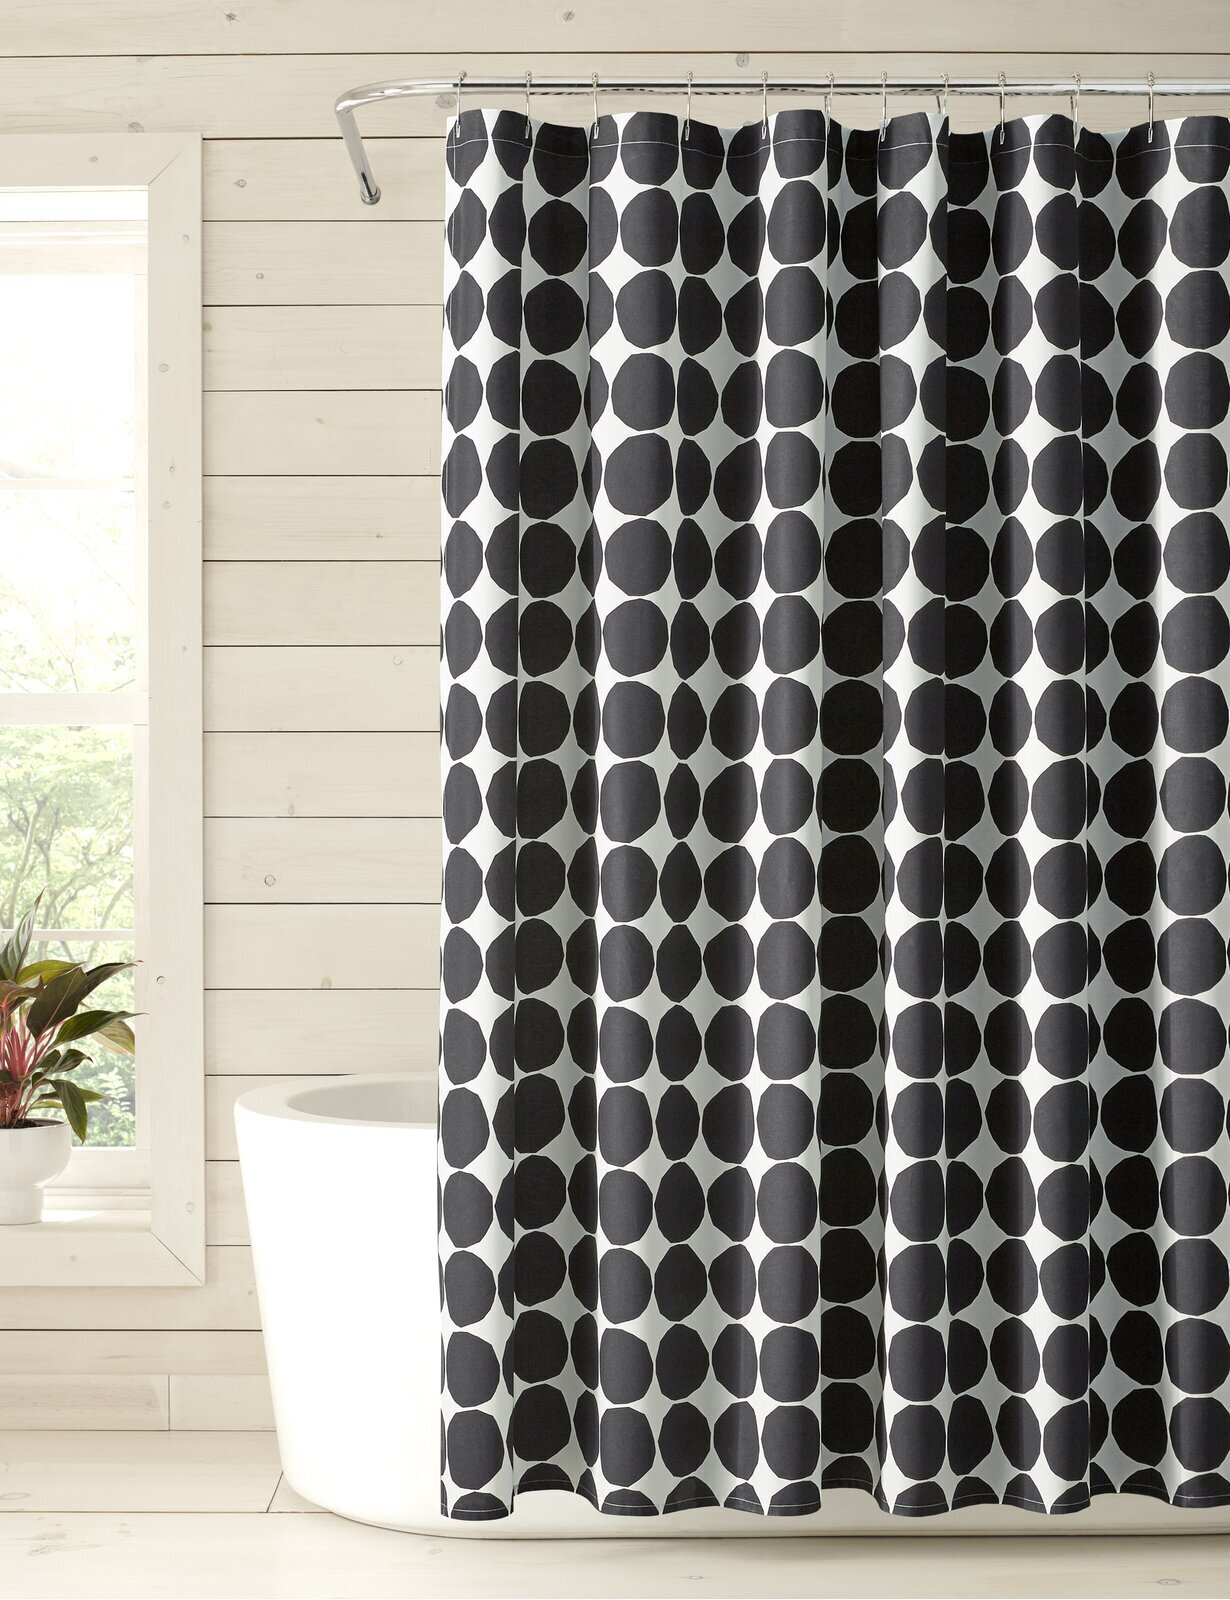 Luxury shower curtain ideas with patterns